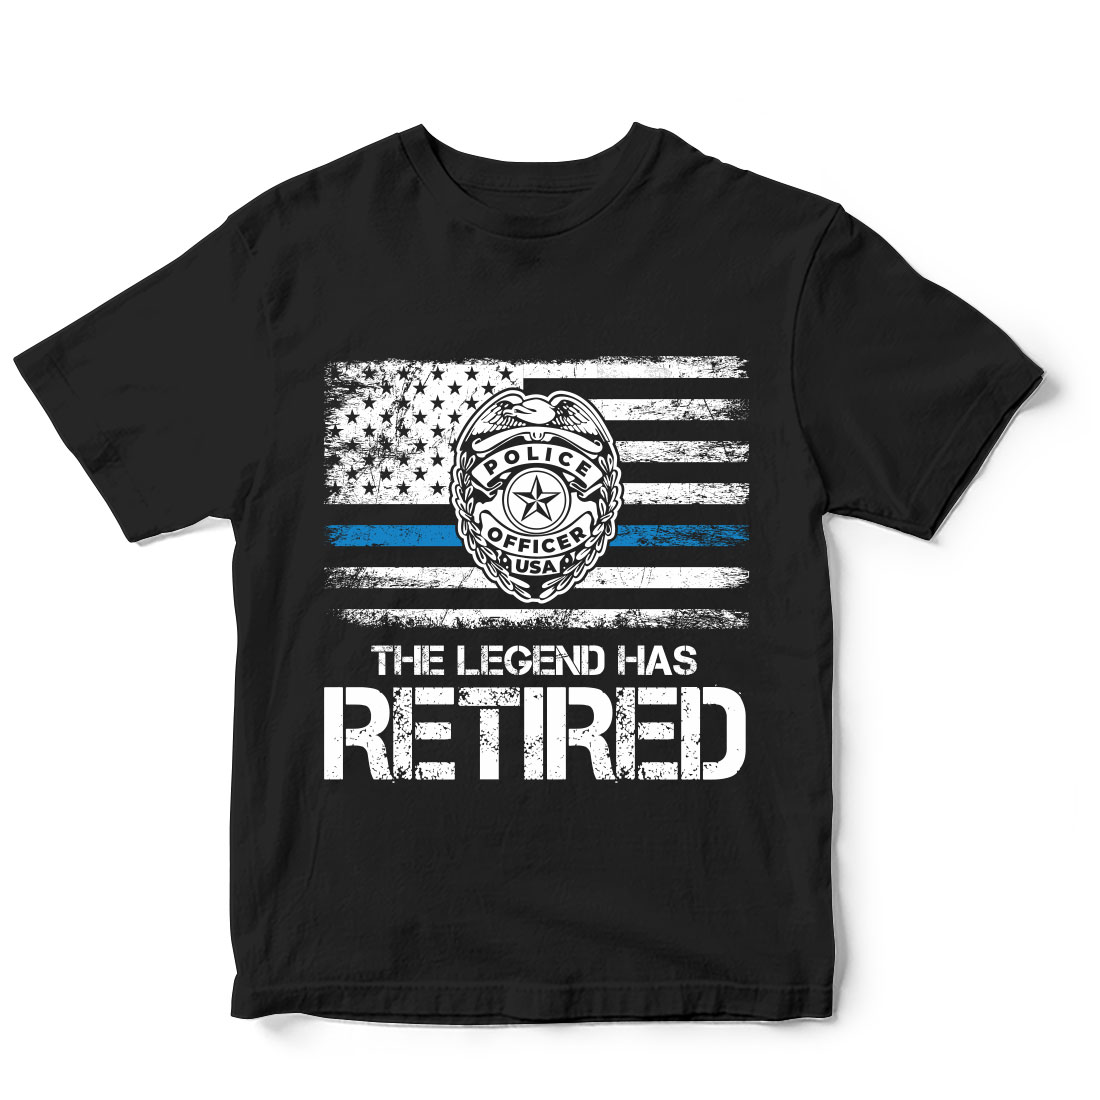 Black t - shirt with the words the legend has retired on it.